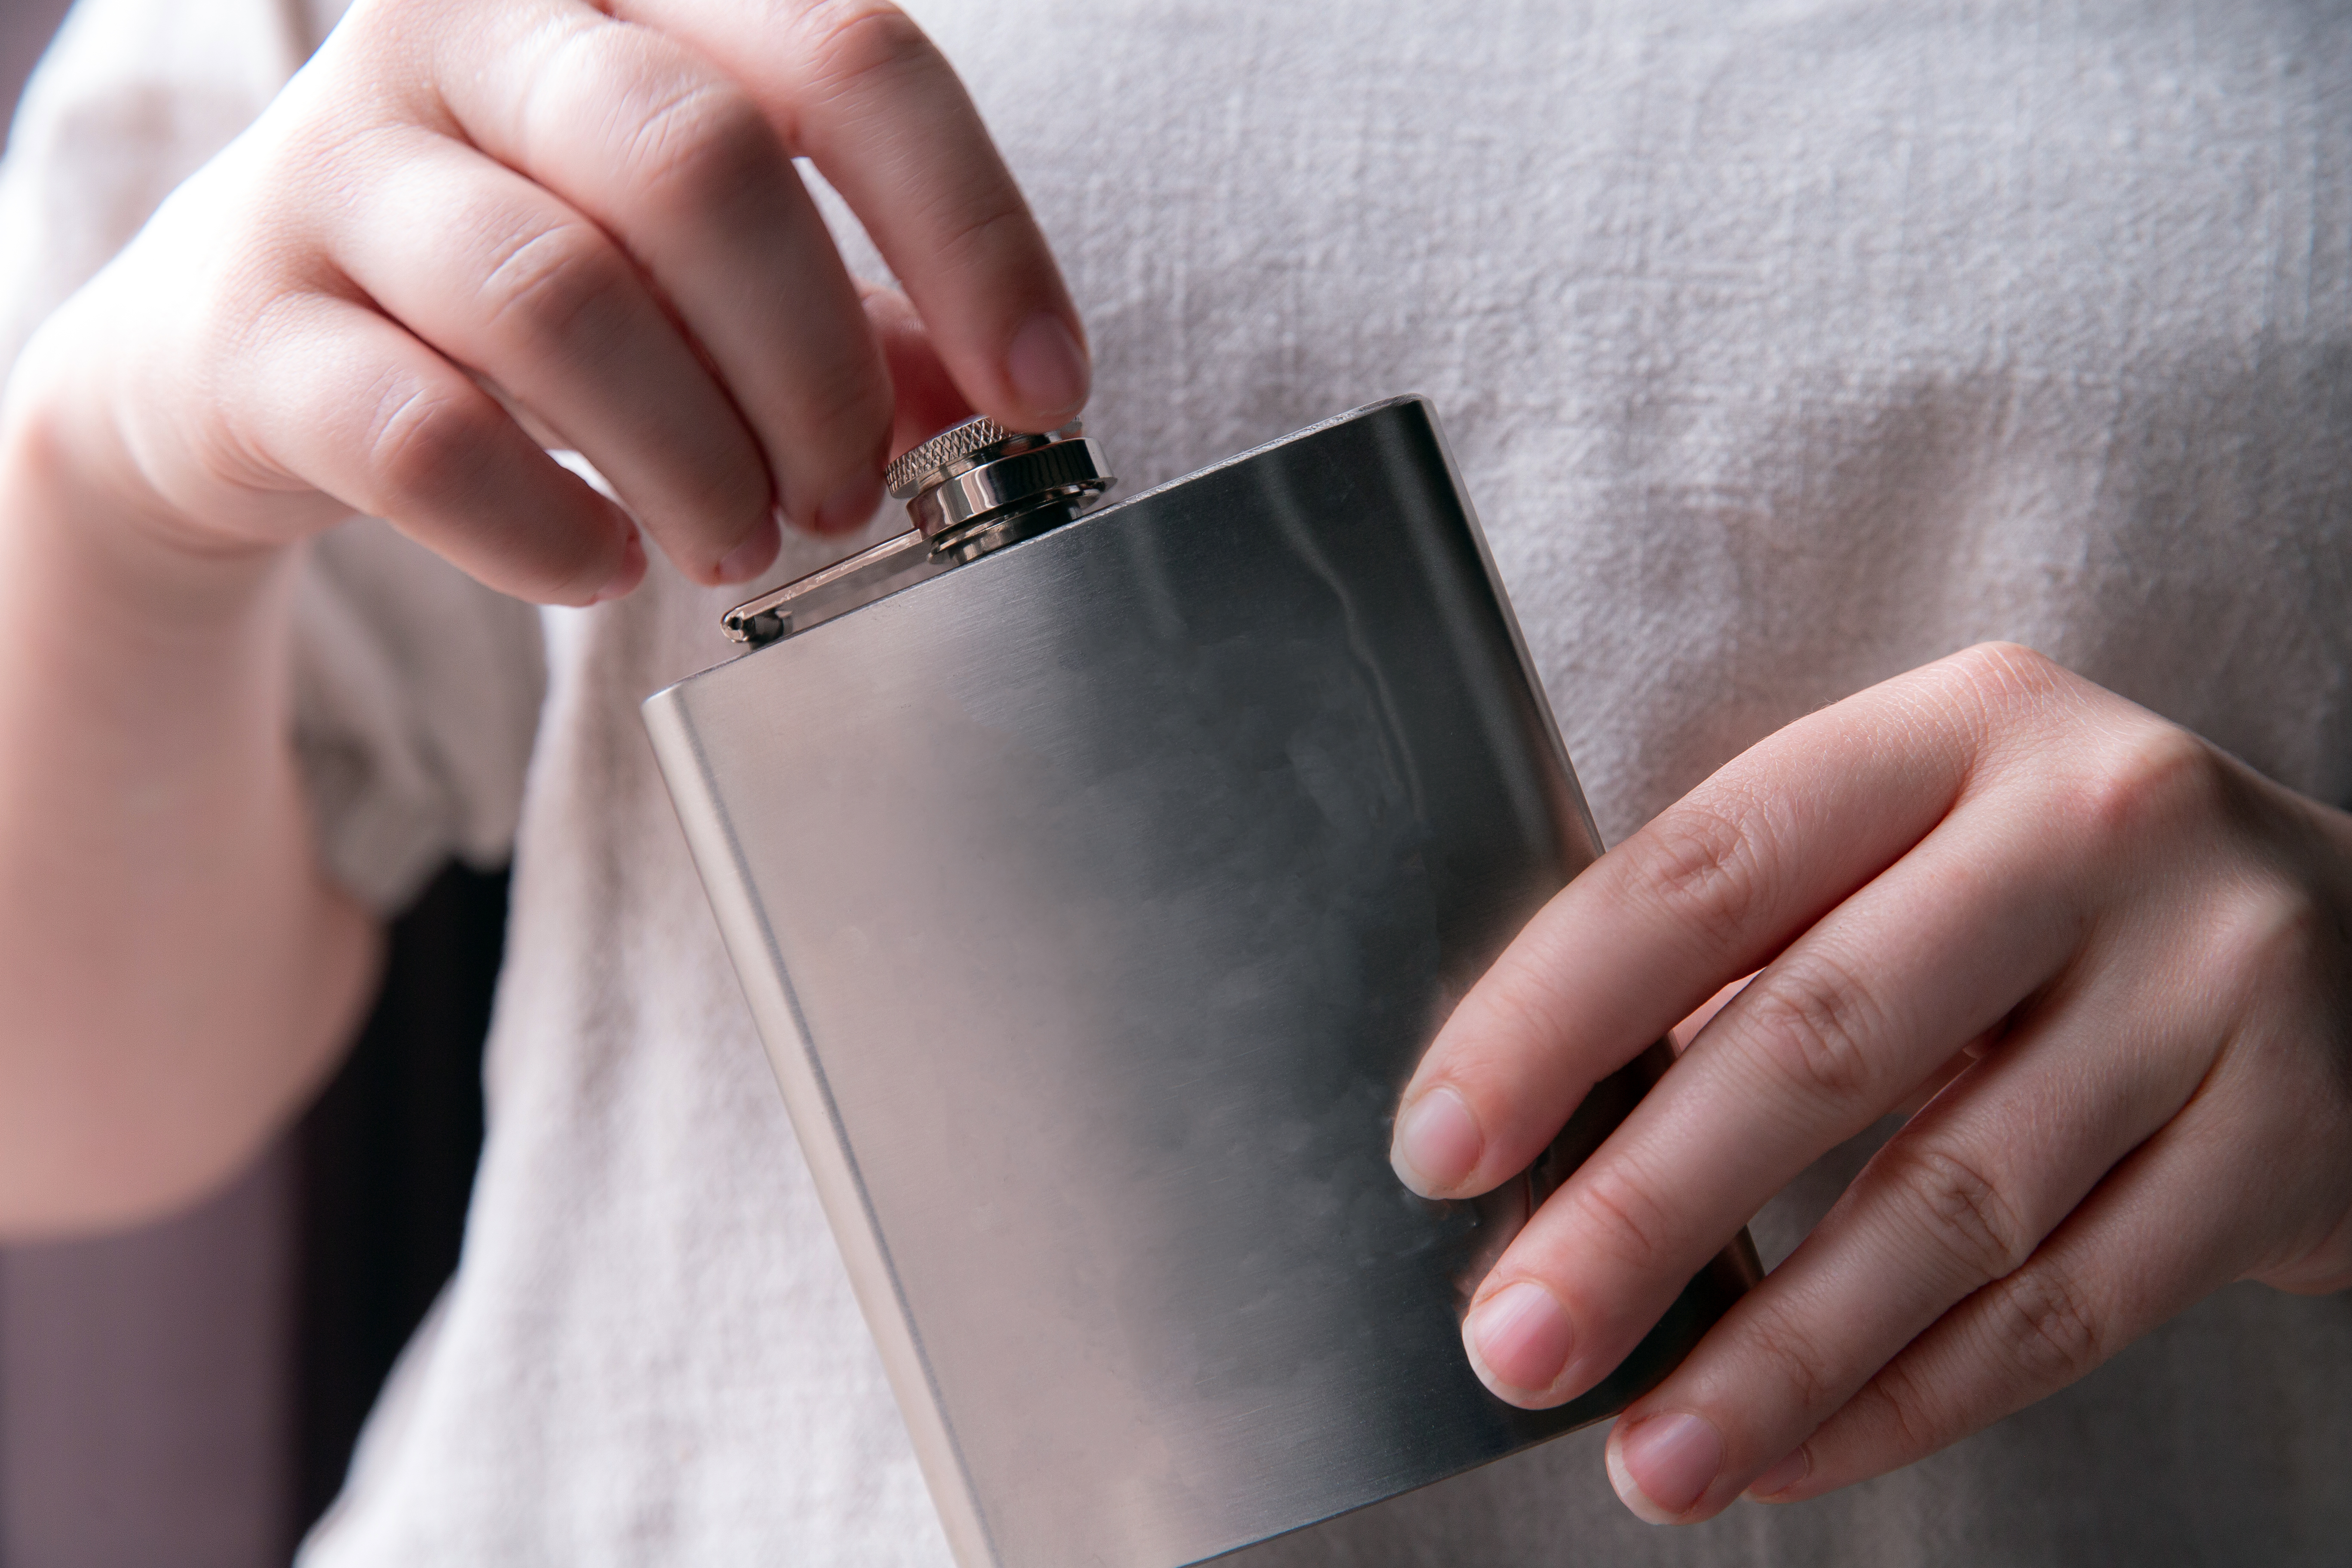 Hand holding a stainless steel hip flask | Source: Shutterstock